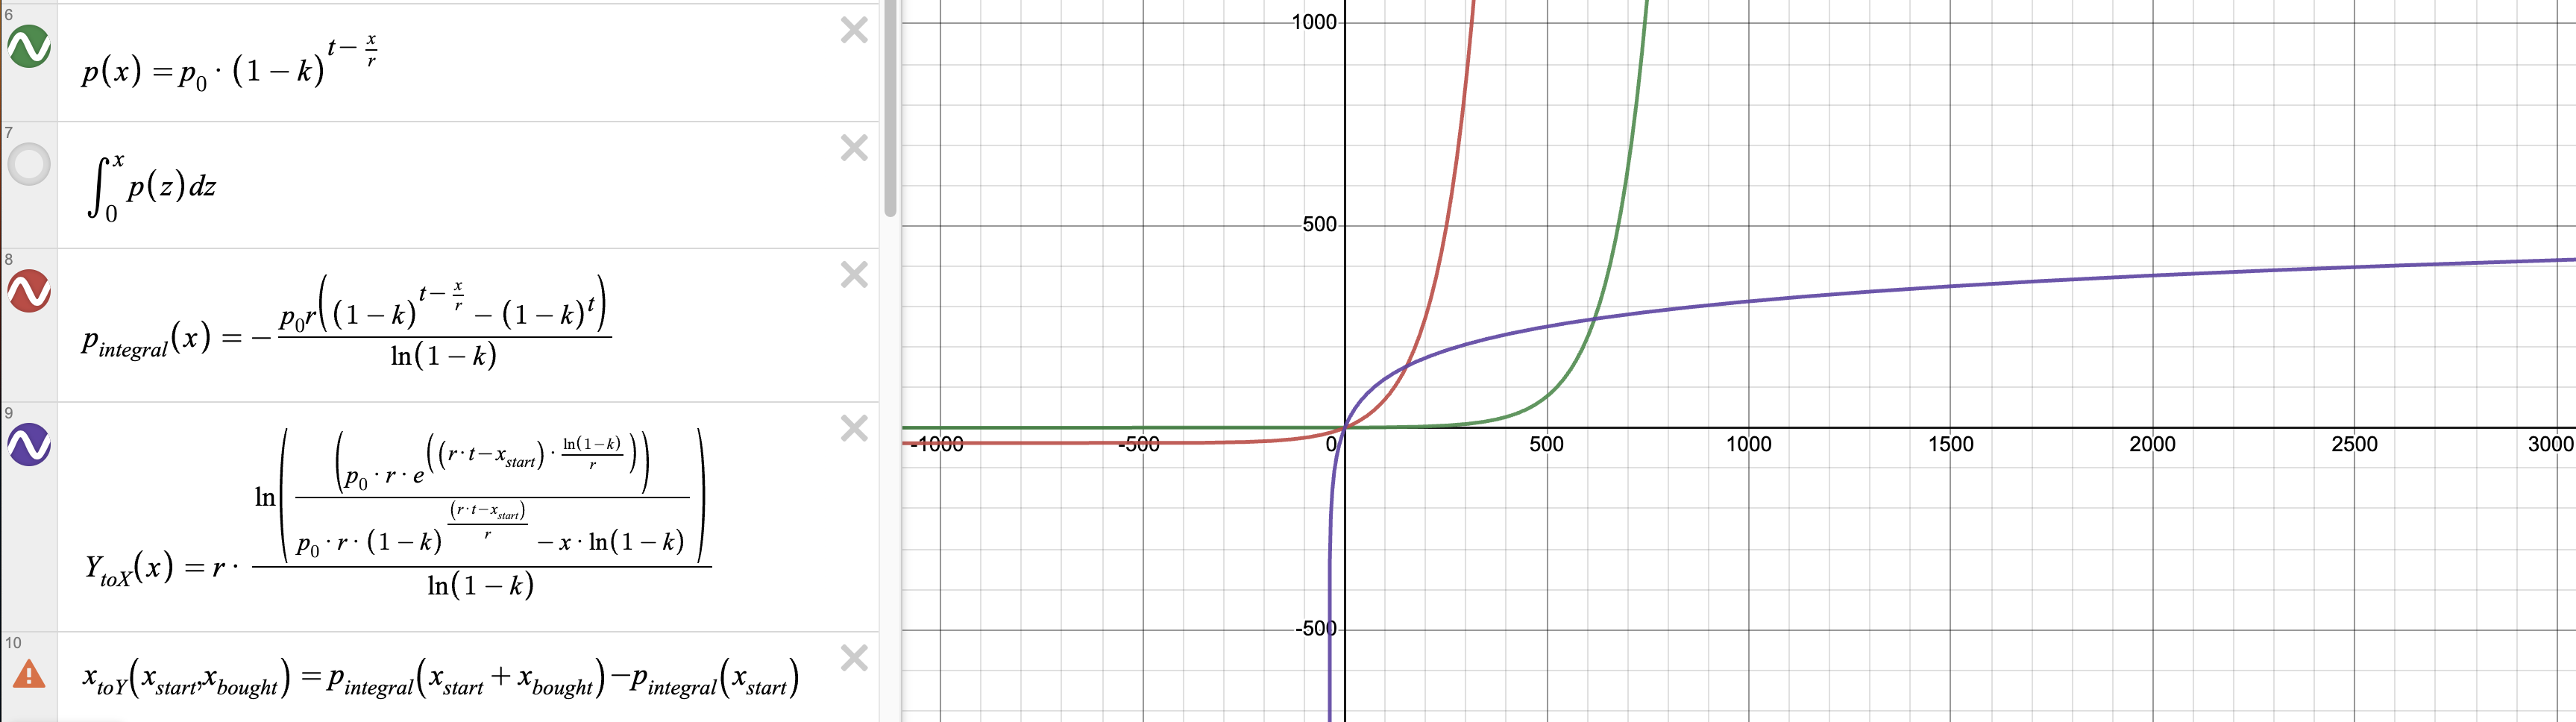 vrgdac-graph.png